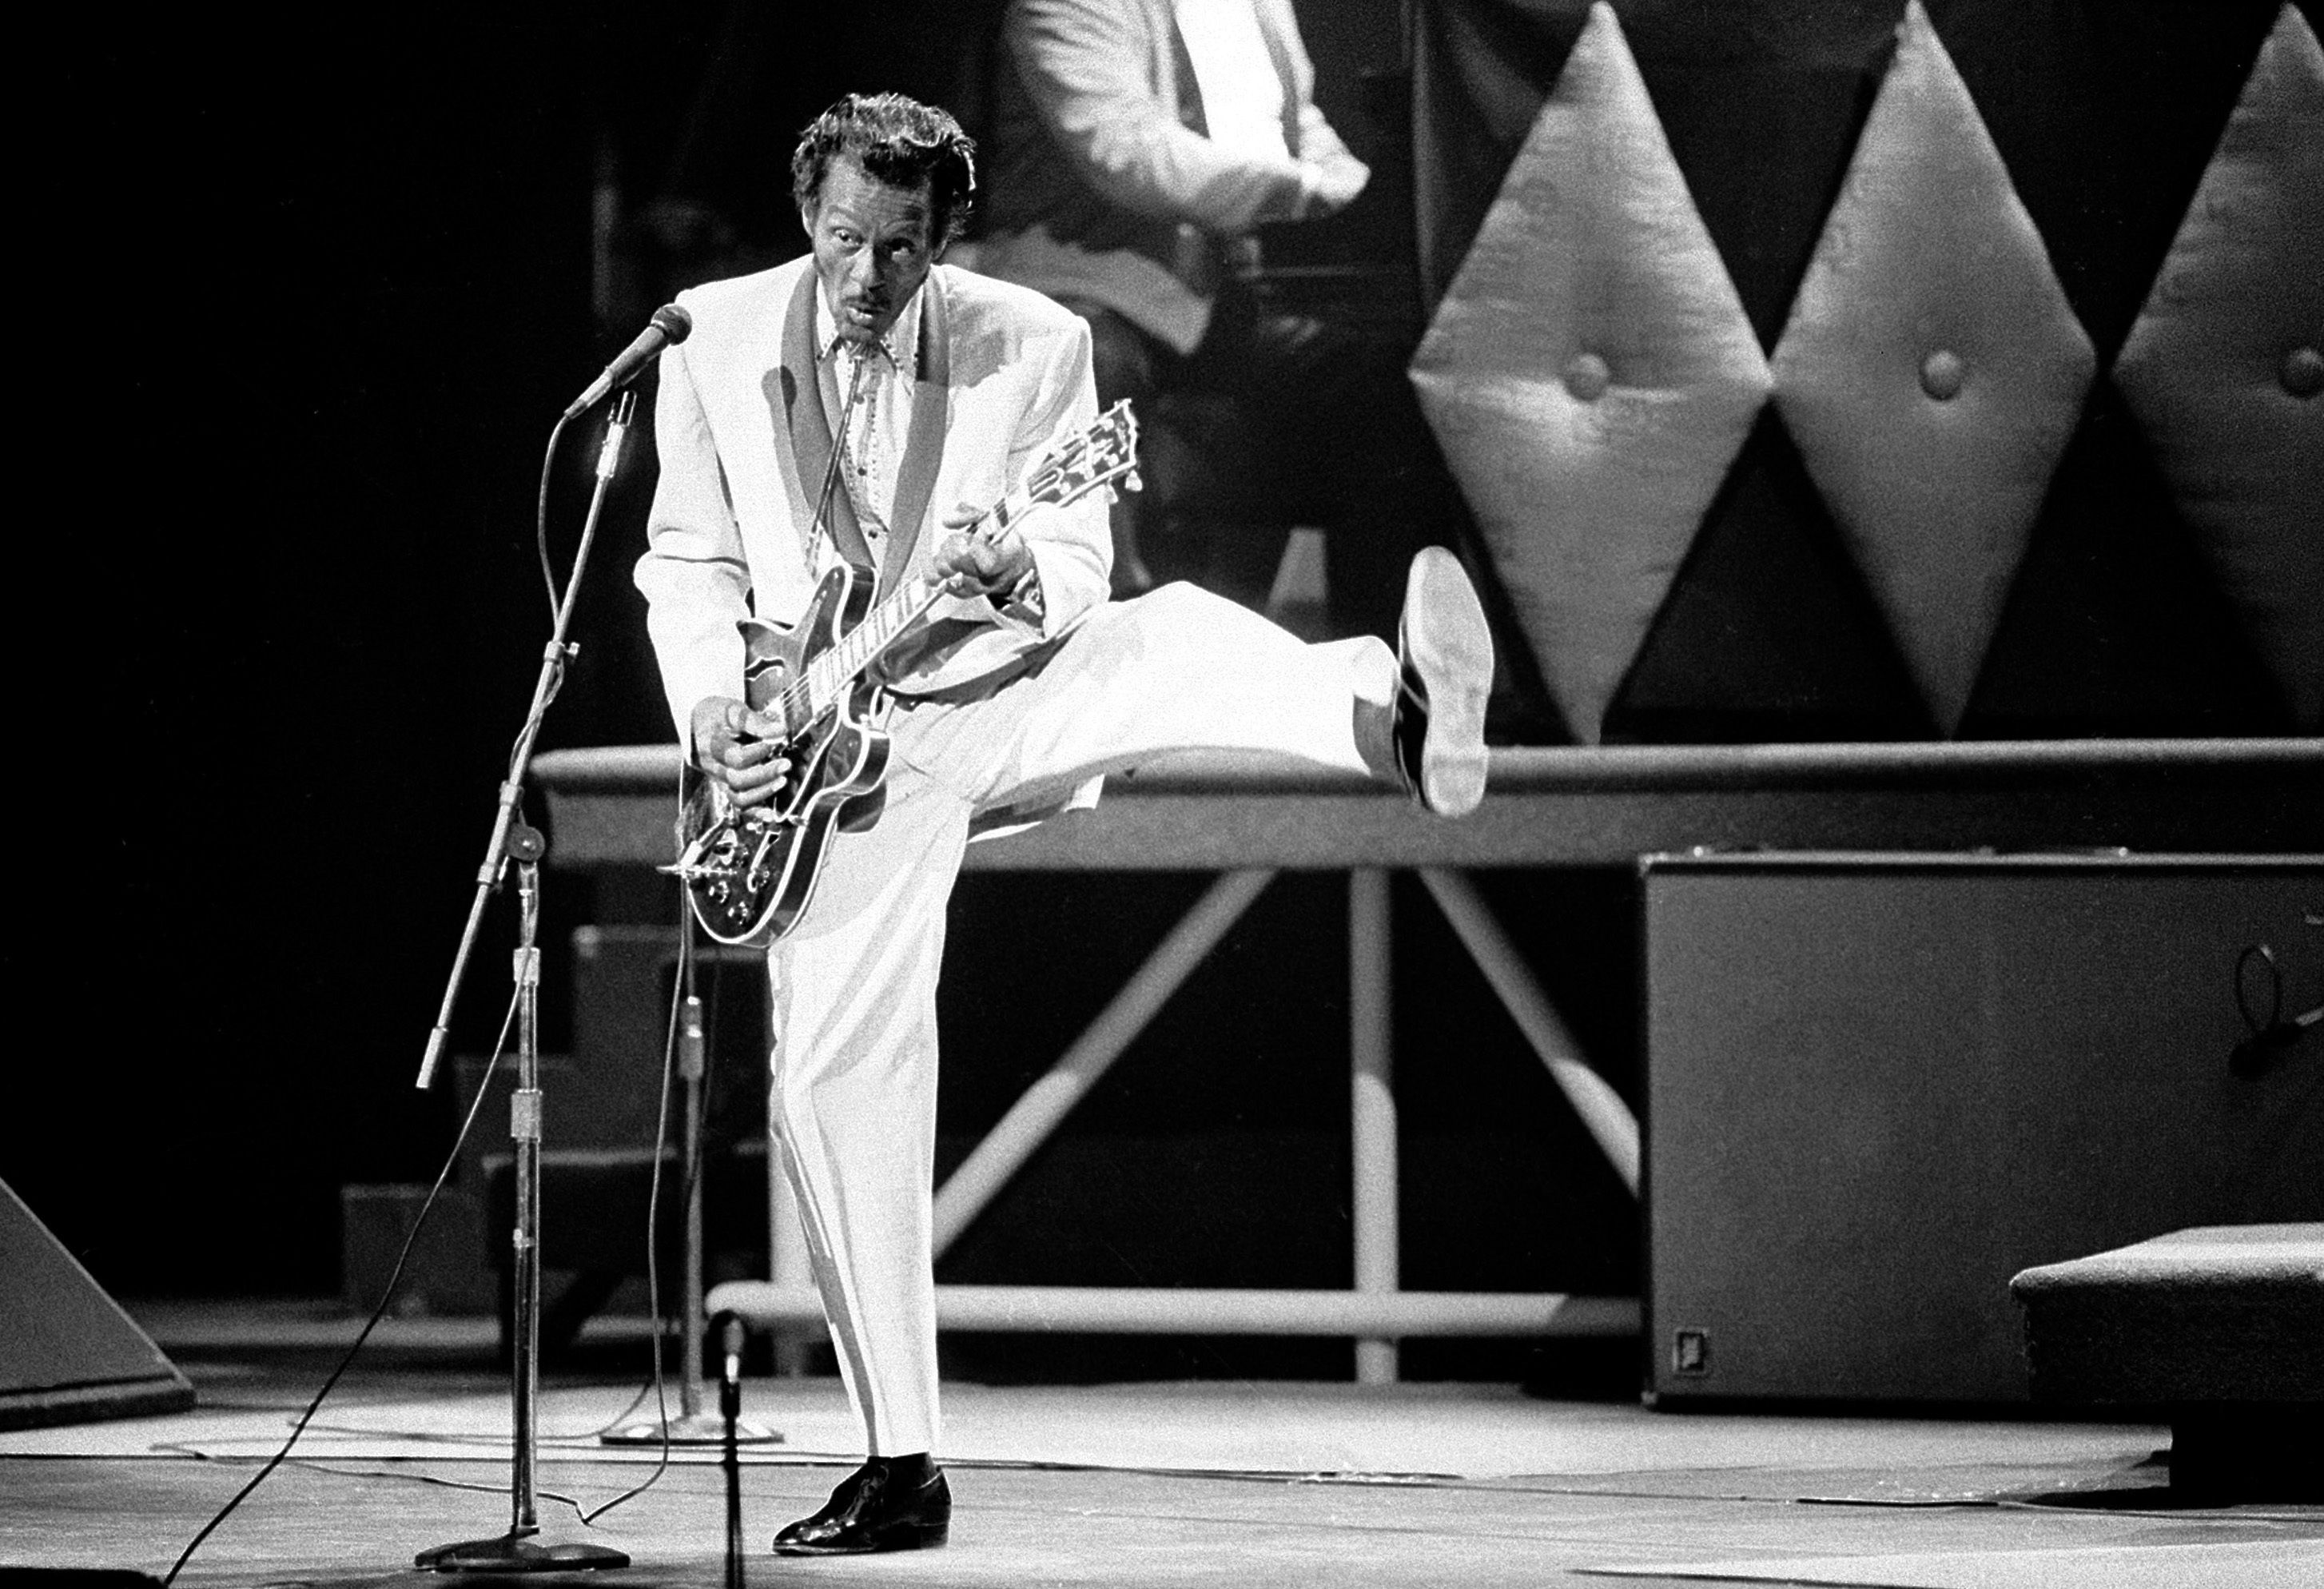 Rock 'n' roll legend Chuck Berry dies at 90 | The Seattle Times